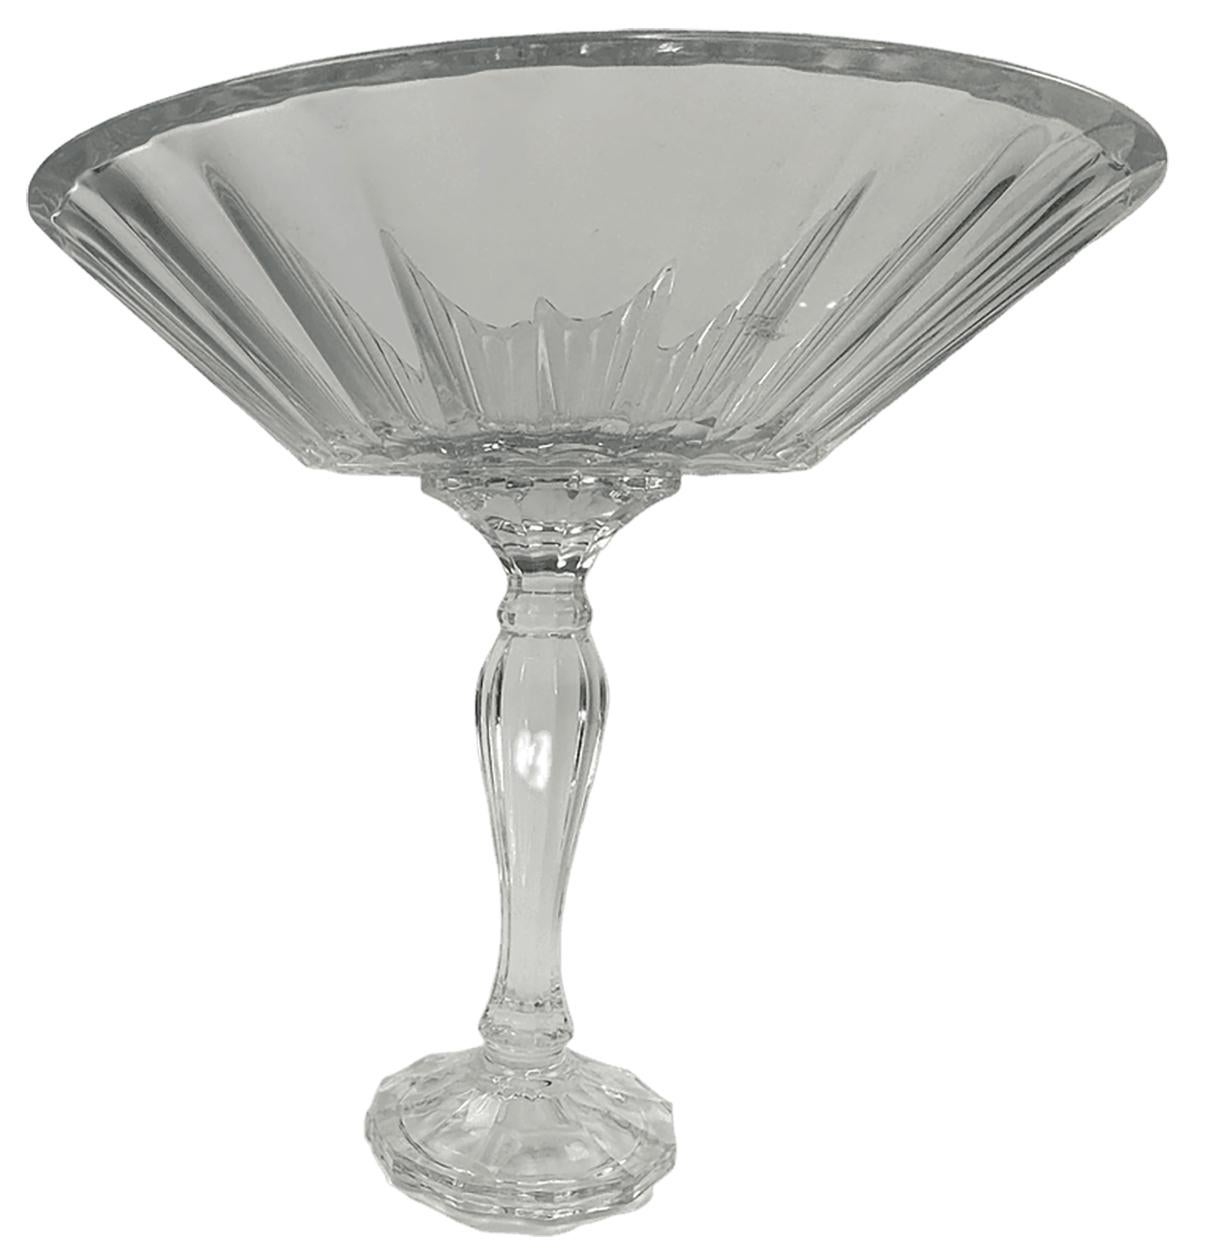 A handsome cut glass tazza or compote. Pieces such as these have been traditionally used for serving food and drink as well as for display. These items were common in the Georgian era. A tazza would have been made or be used in the homes of